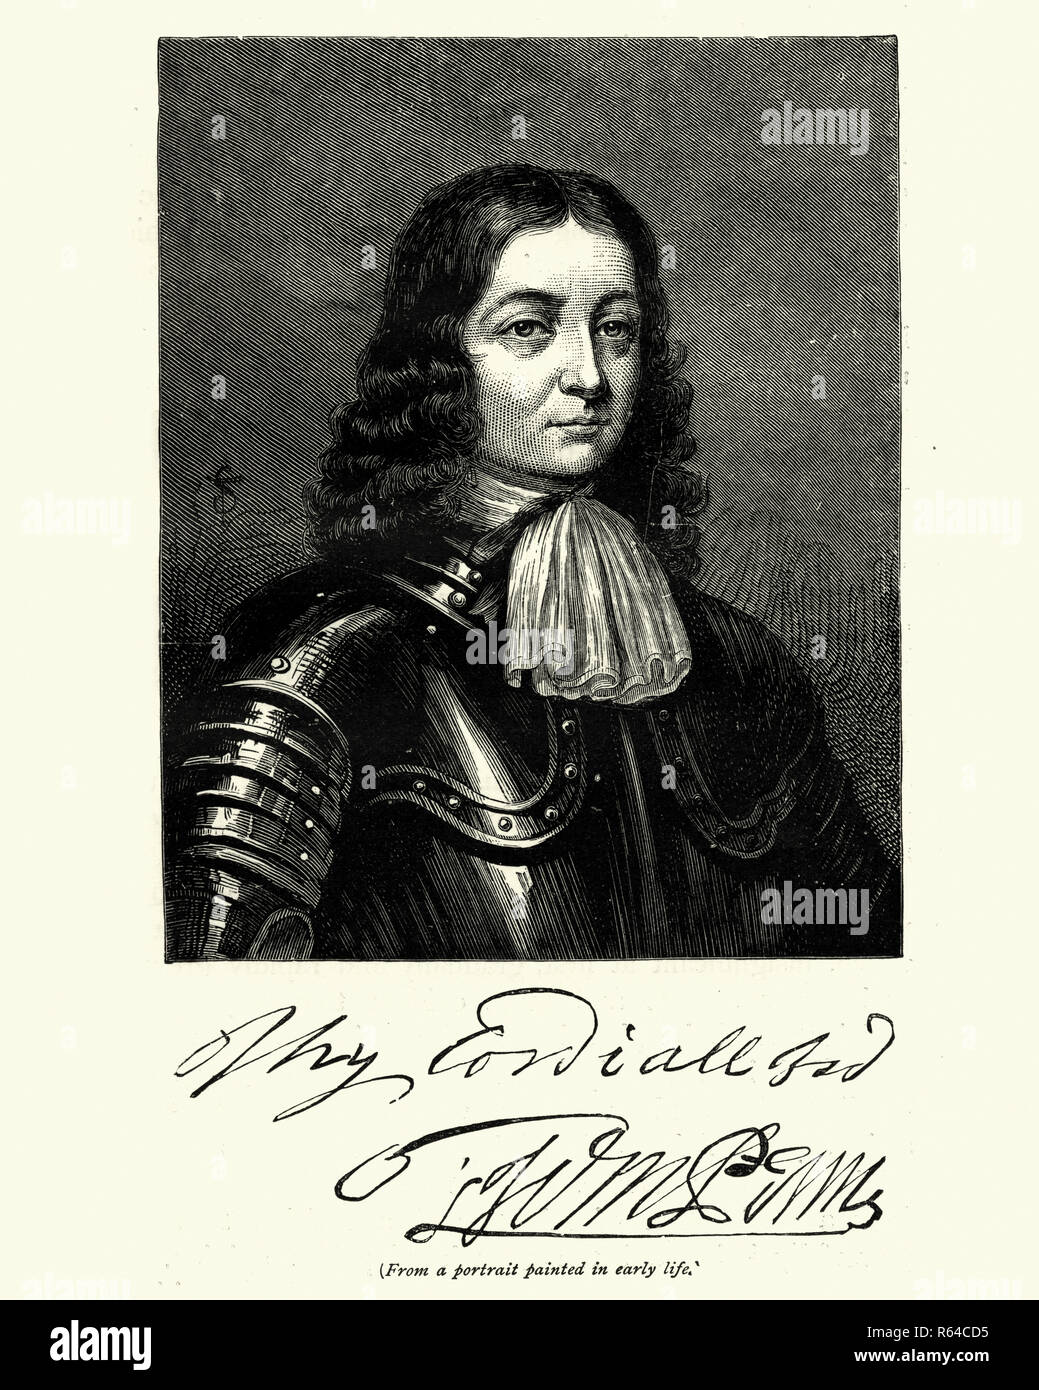 Vinatge engraving of William Penn, (14 October 1644 – 30 July 1718) was the son of Sir William Penn, and was an English nobleman, writer, early Quaker, and founder of the English North American colony the Province of Pennsylvania. Stock Photo